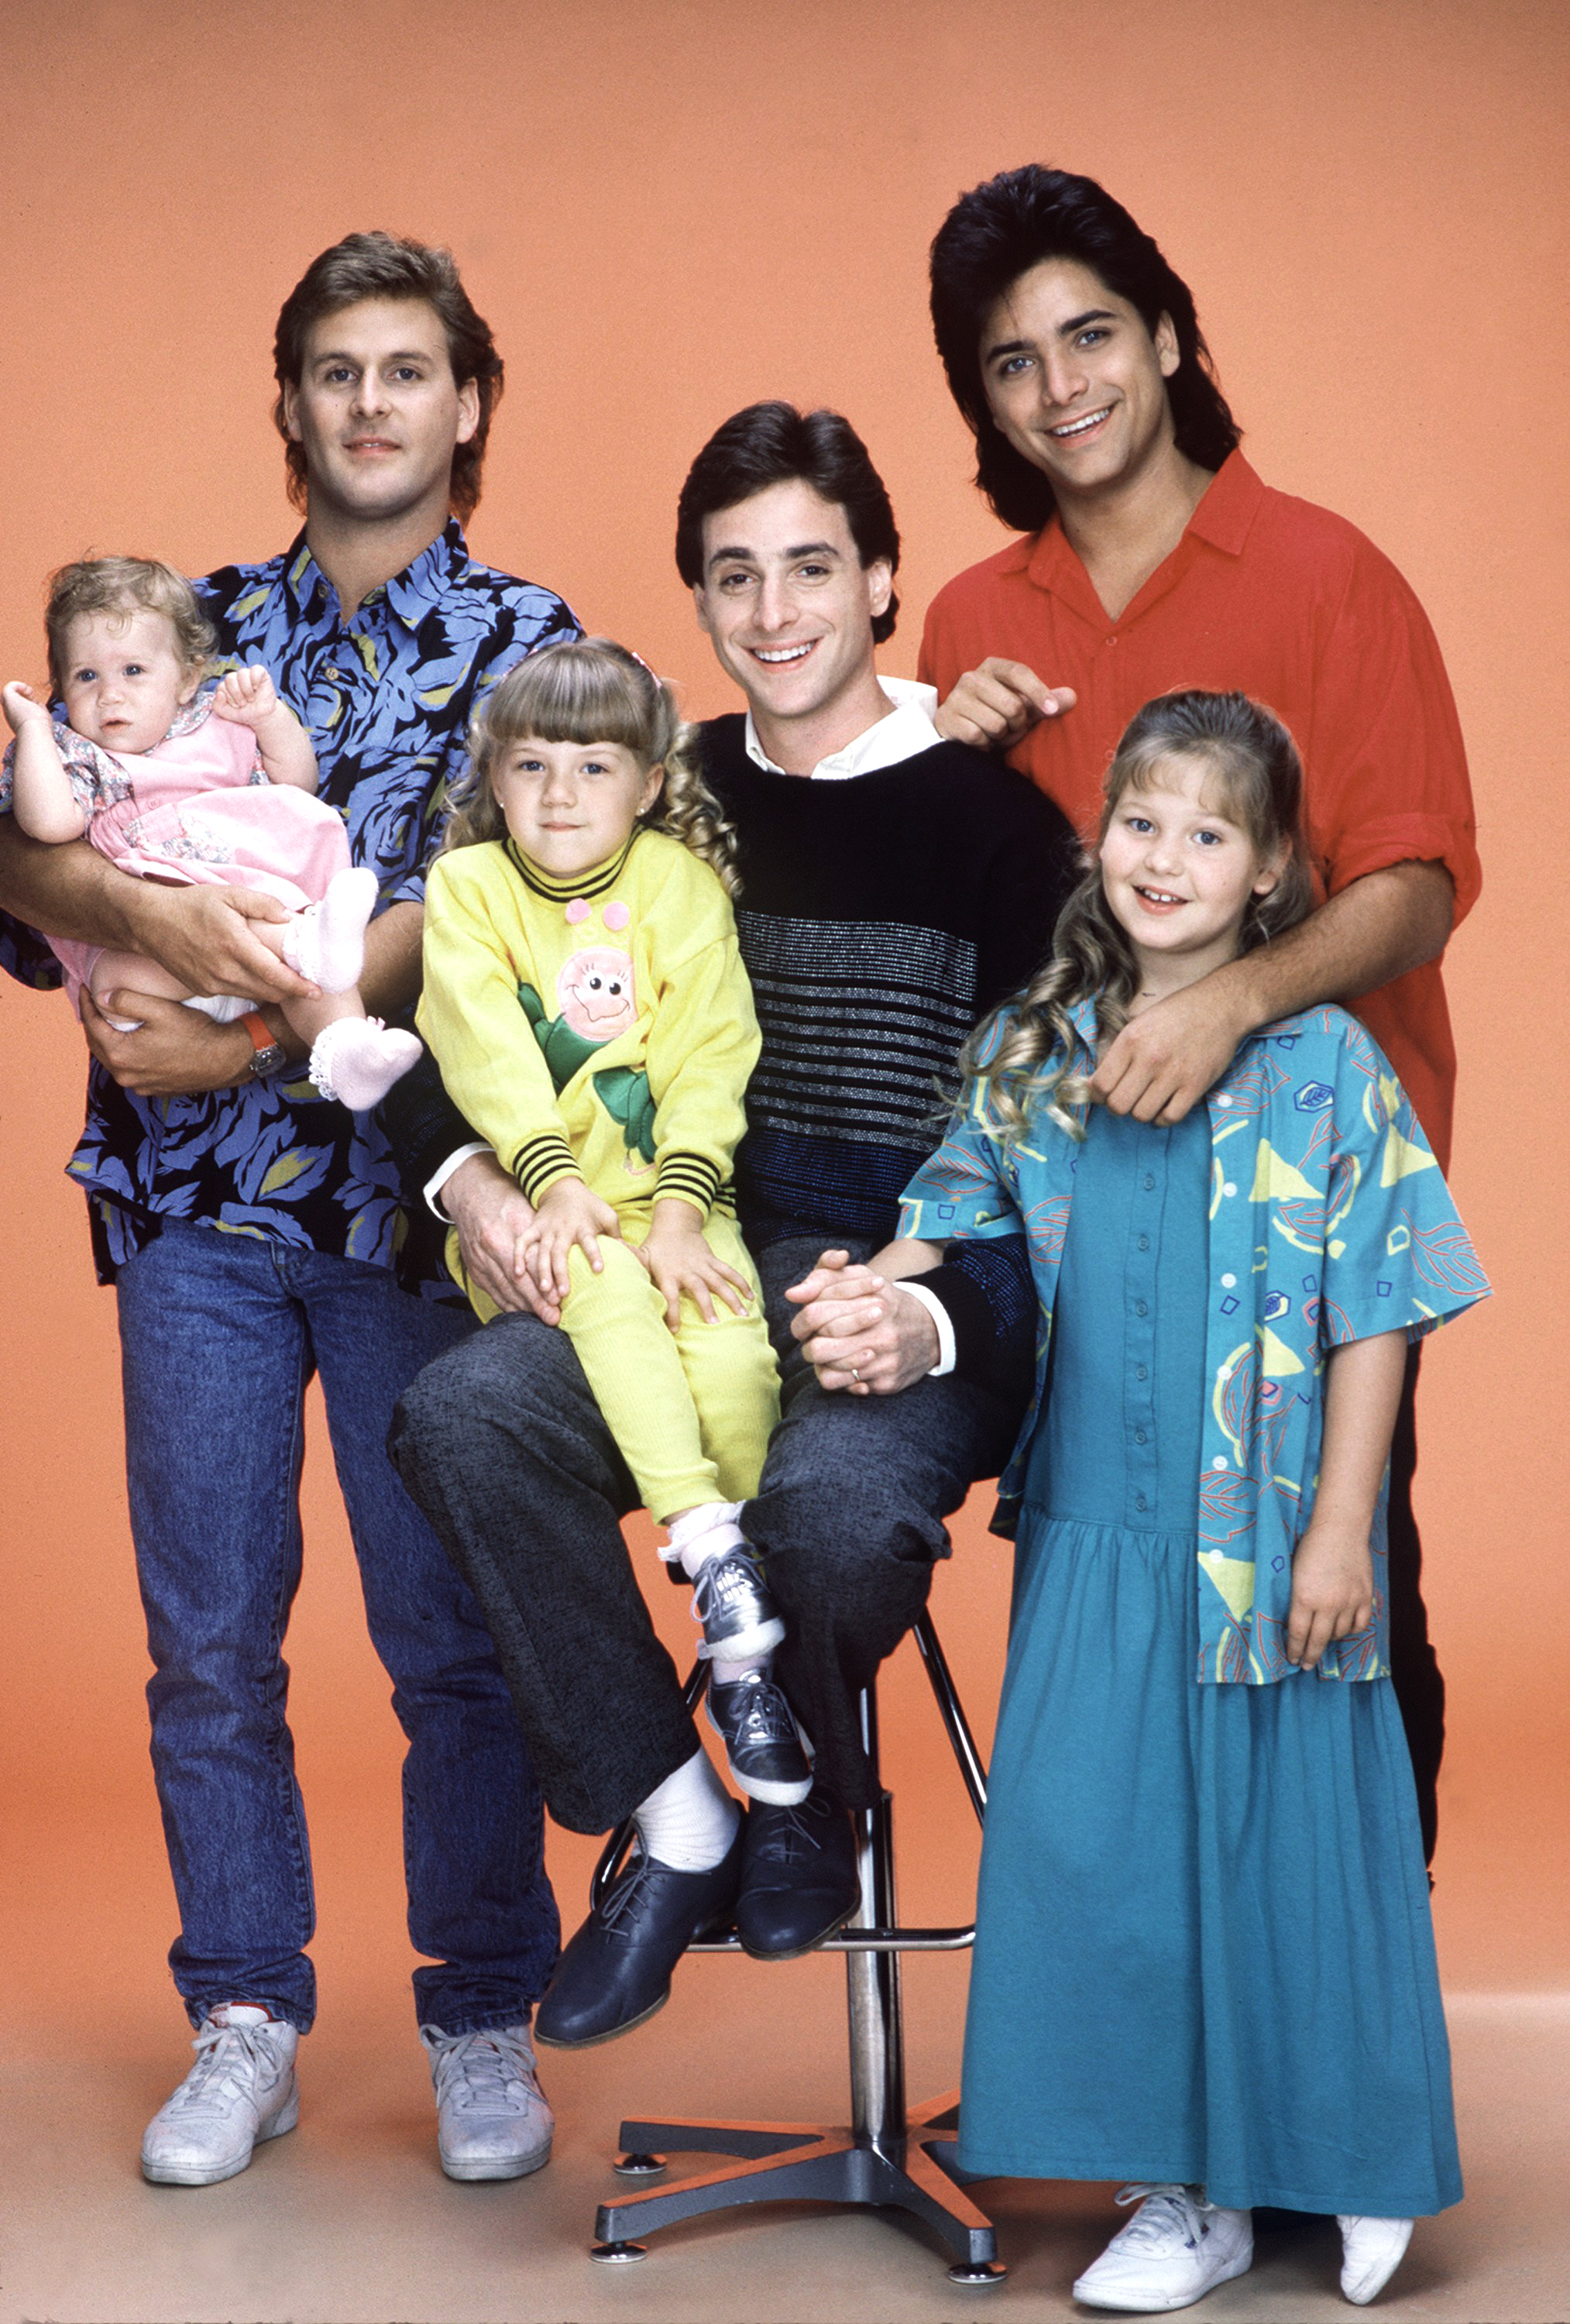 Jodie Sweetin with cast of "Full House" photographed in 1987 | Source: Getty Images